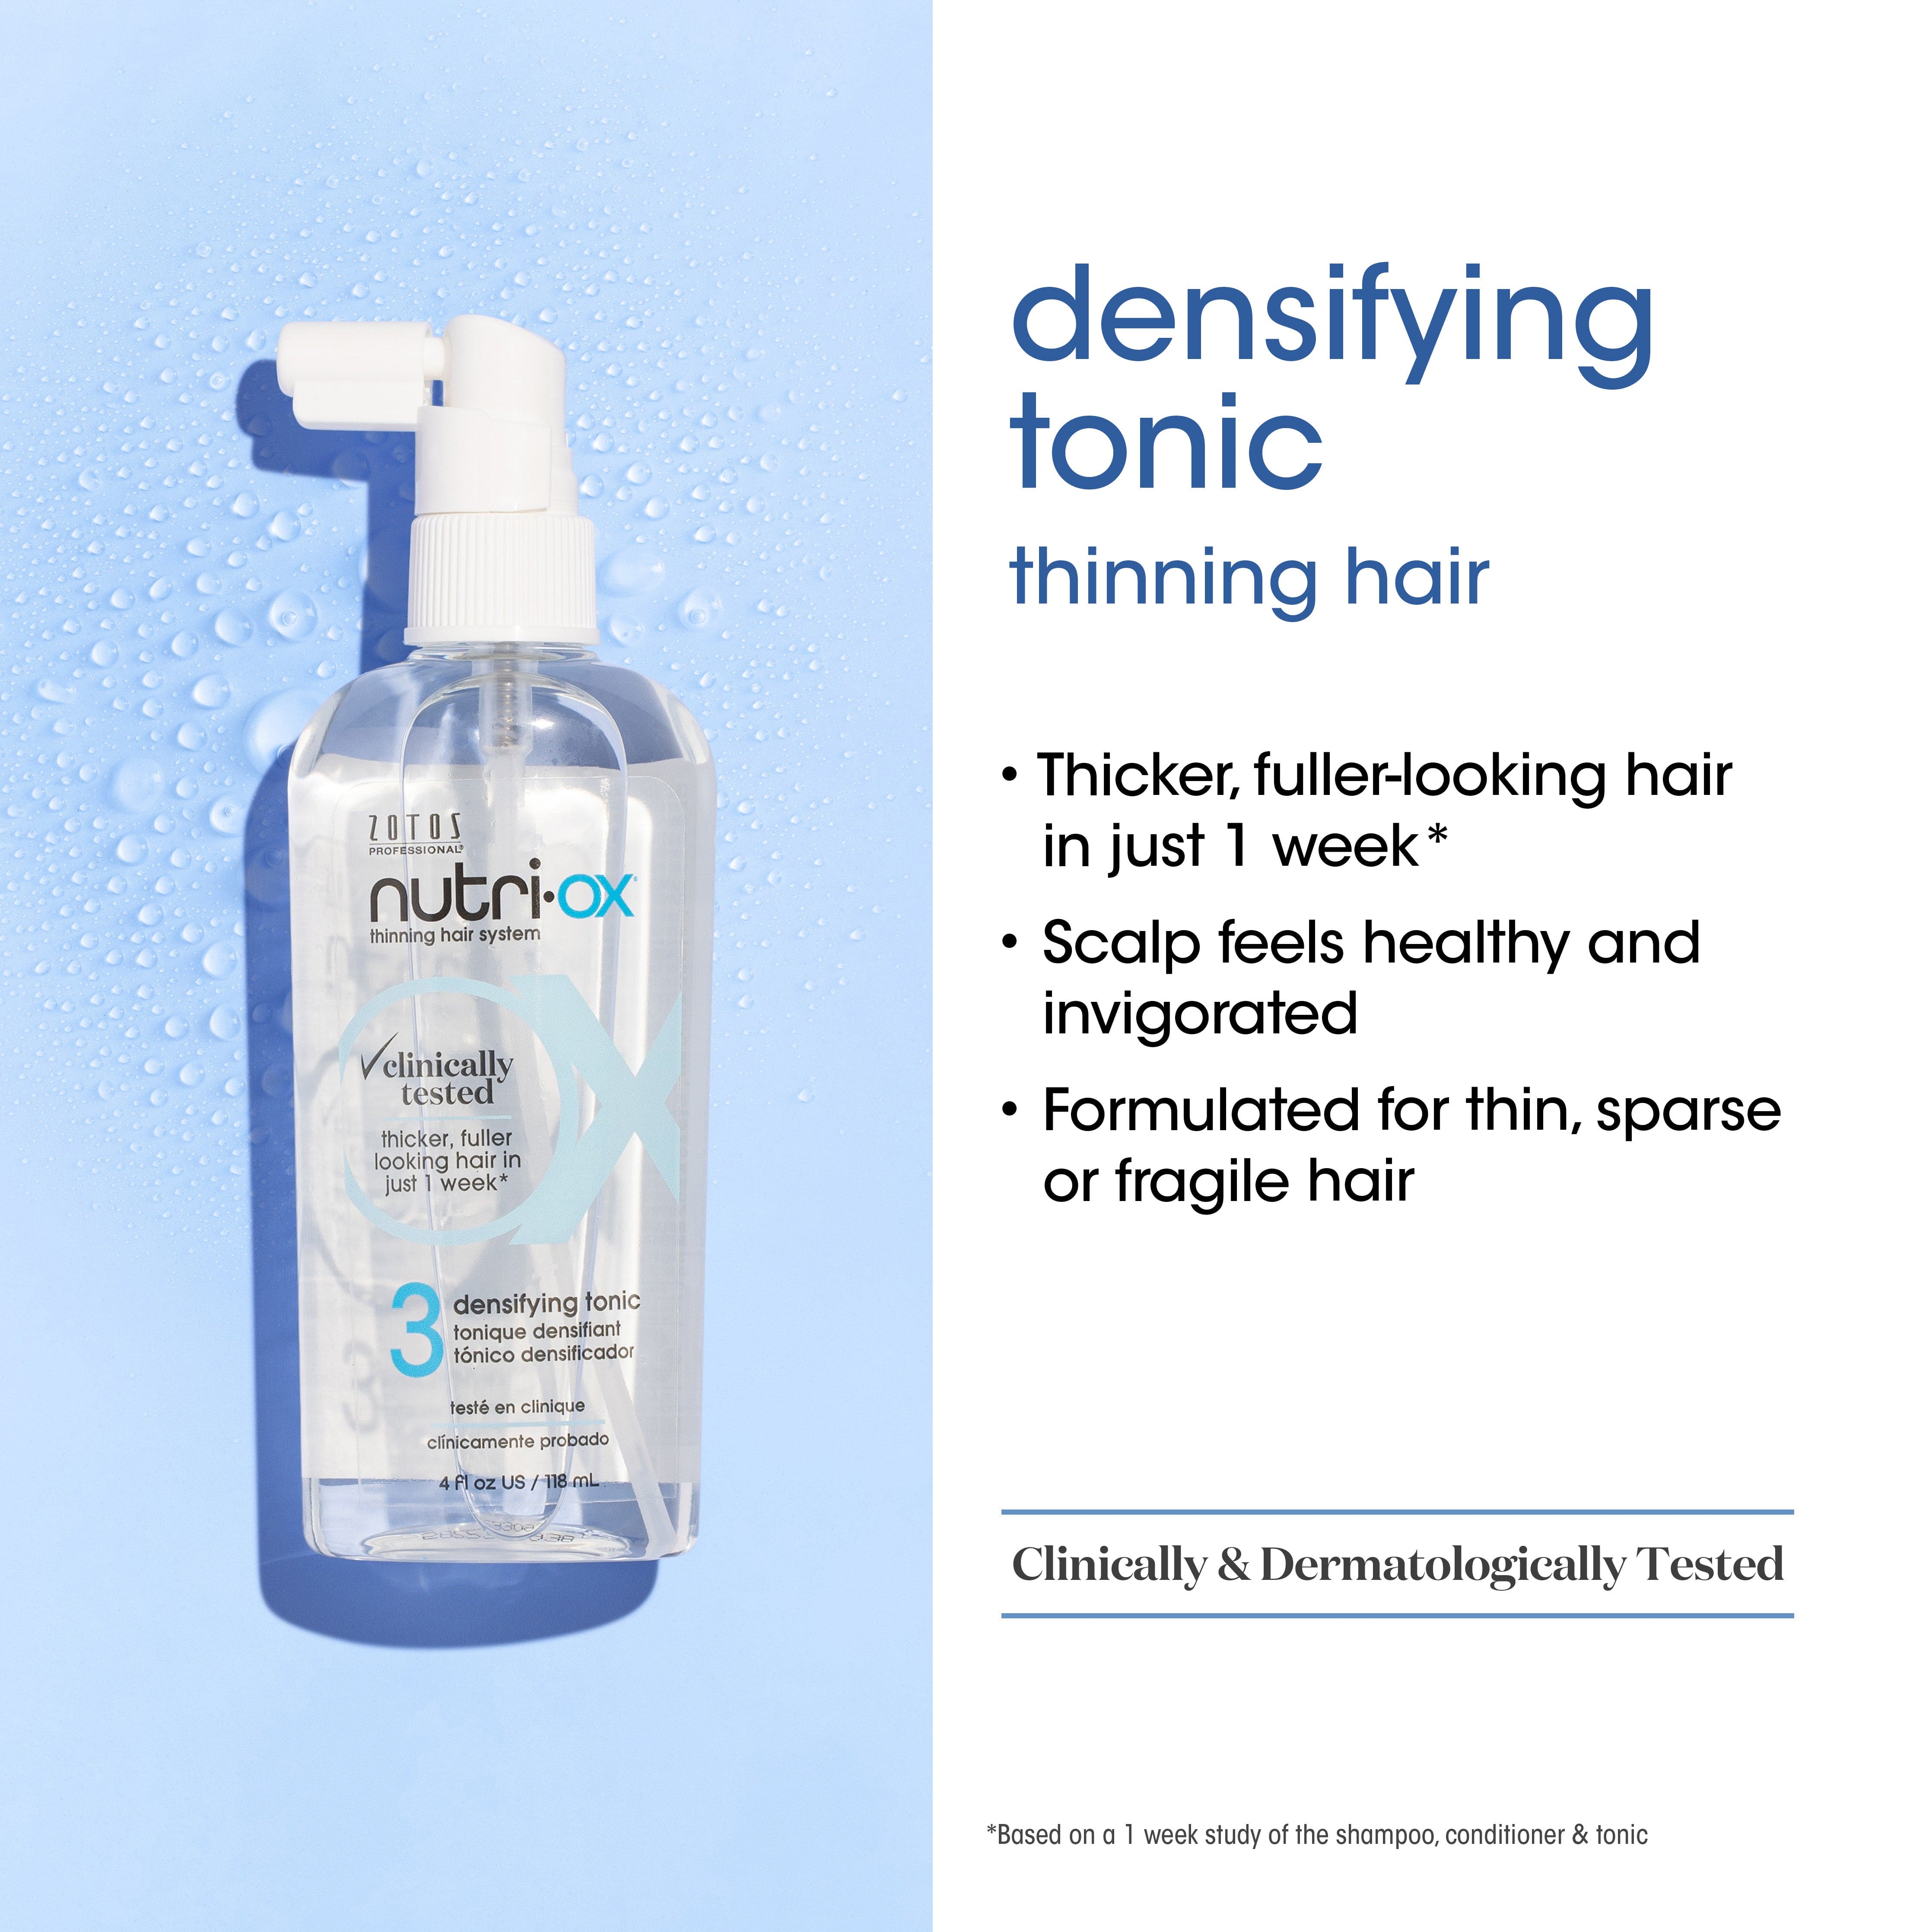 Densifying tonic for thinning hair. Thicker, fuller-looking hair in just 1 week, scalp feels healthy and invigorated, formulated for thin, sparse or fragile hair. 